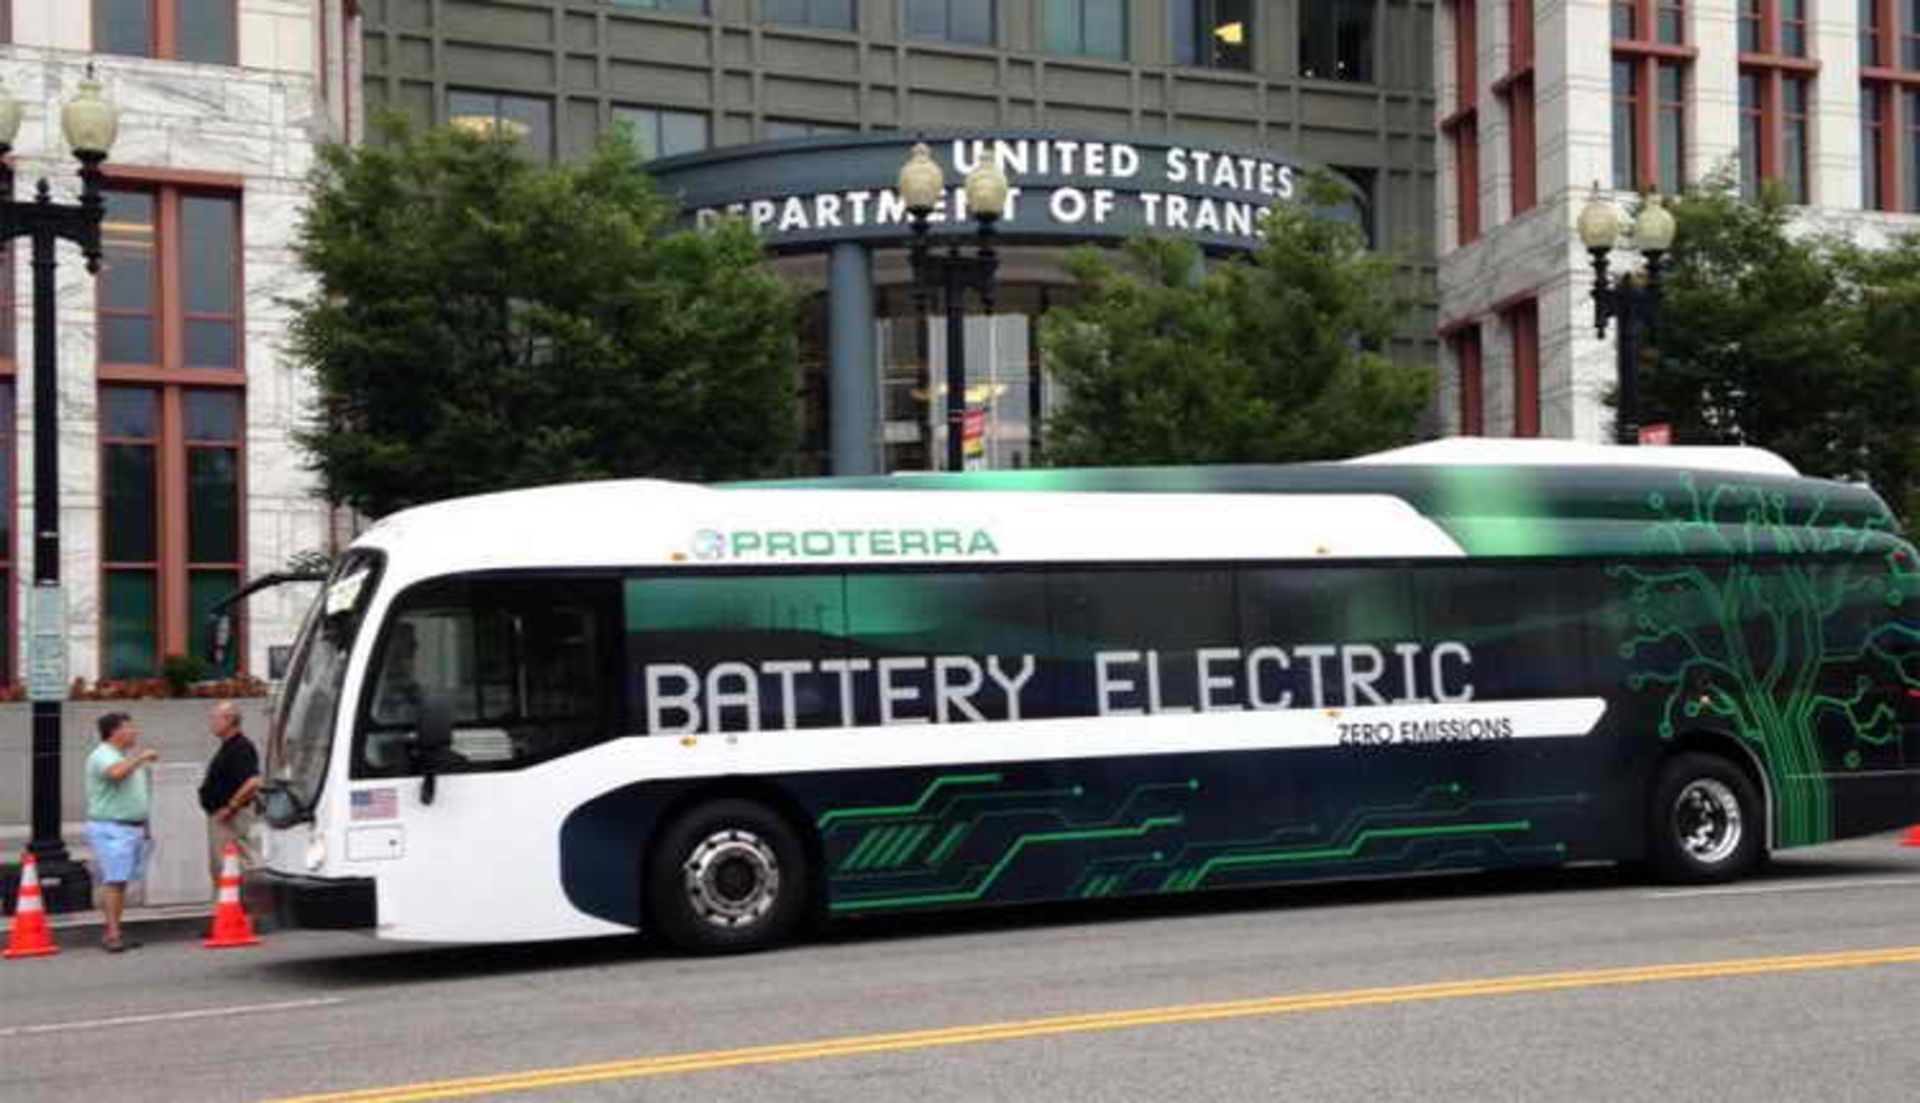 Proterra electric bus company